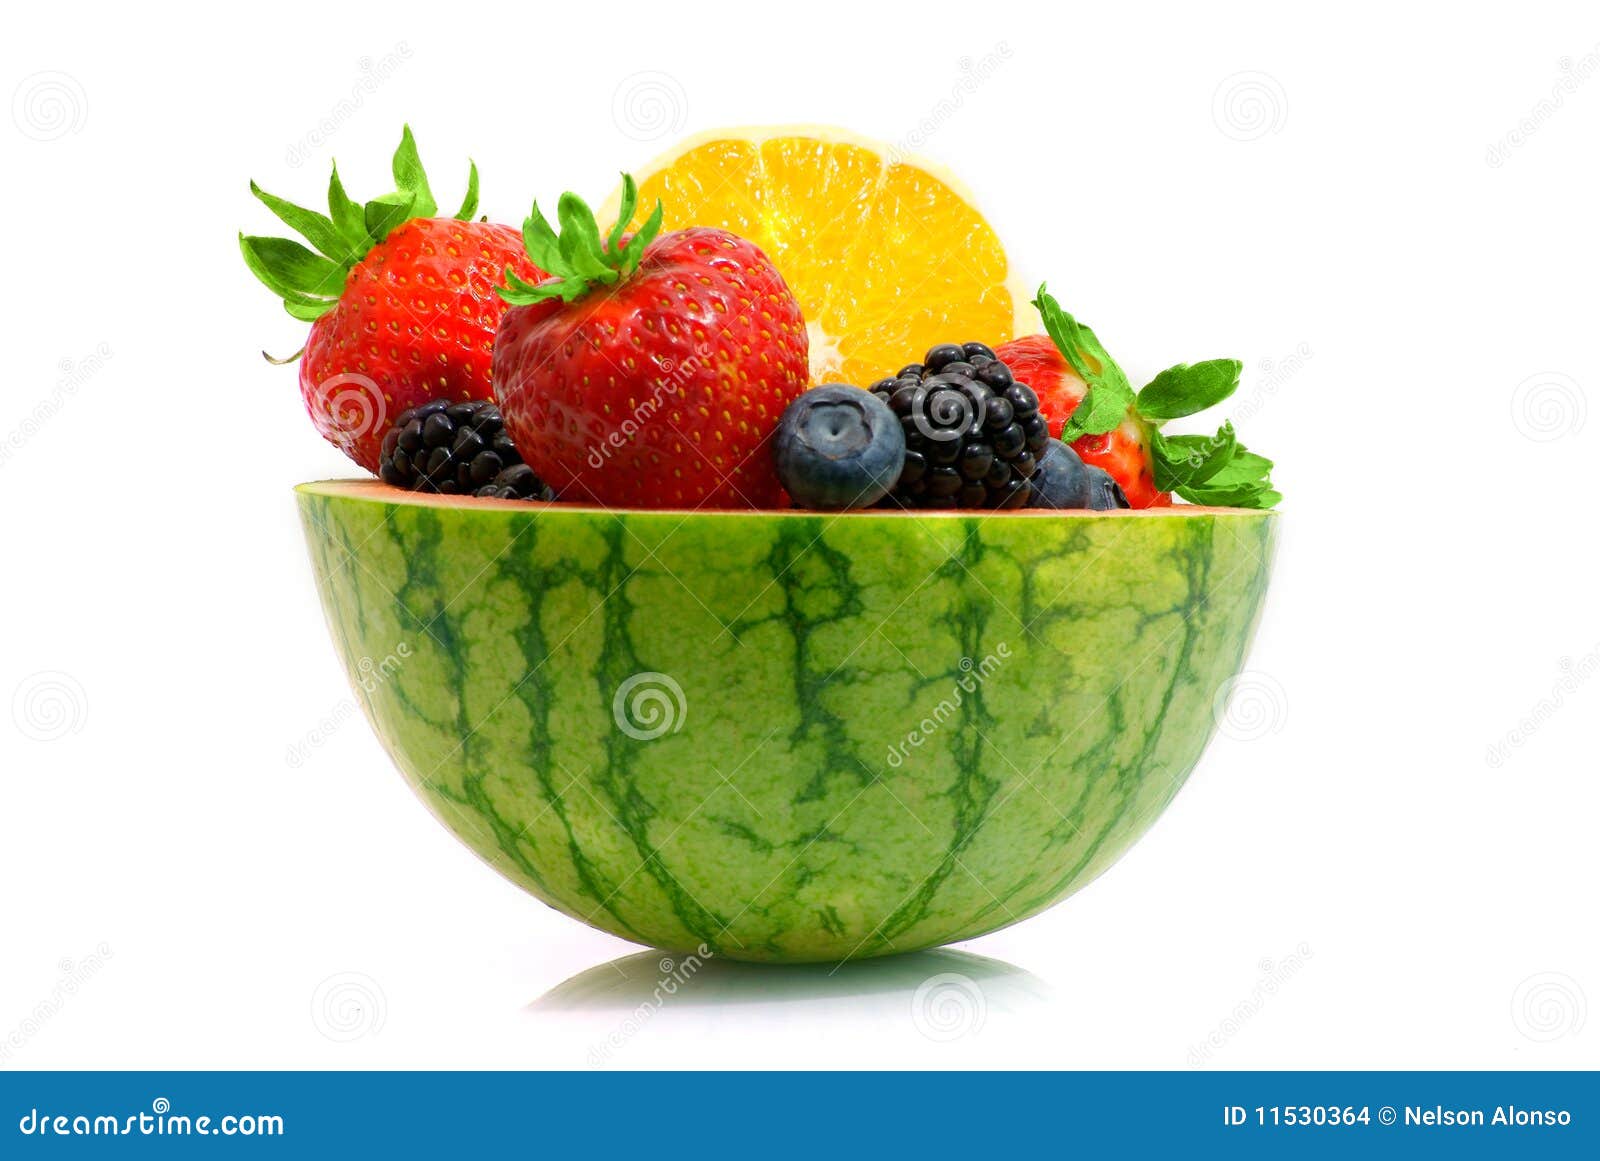 Profile of melon fruit bowl. Melon carved as bowl filled with orange and different berries